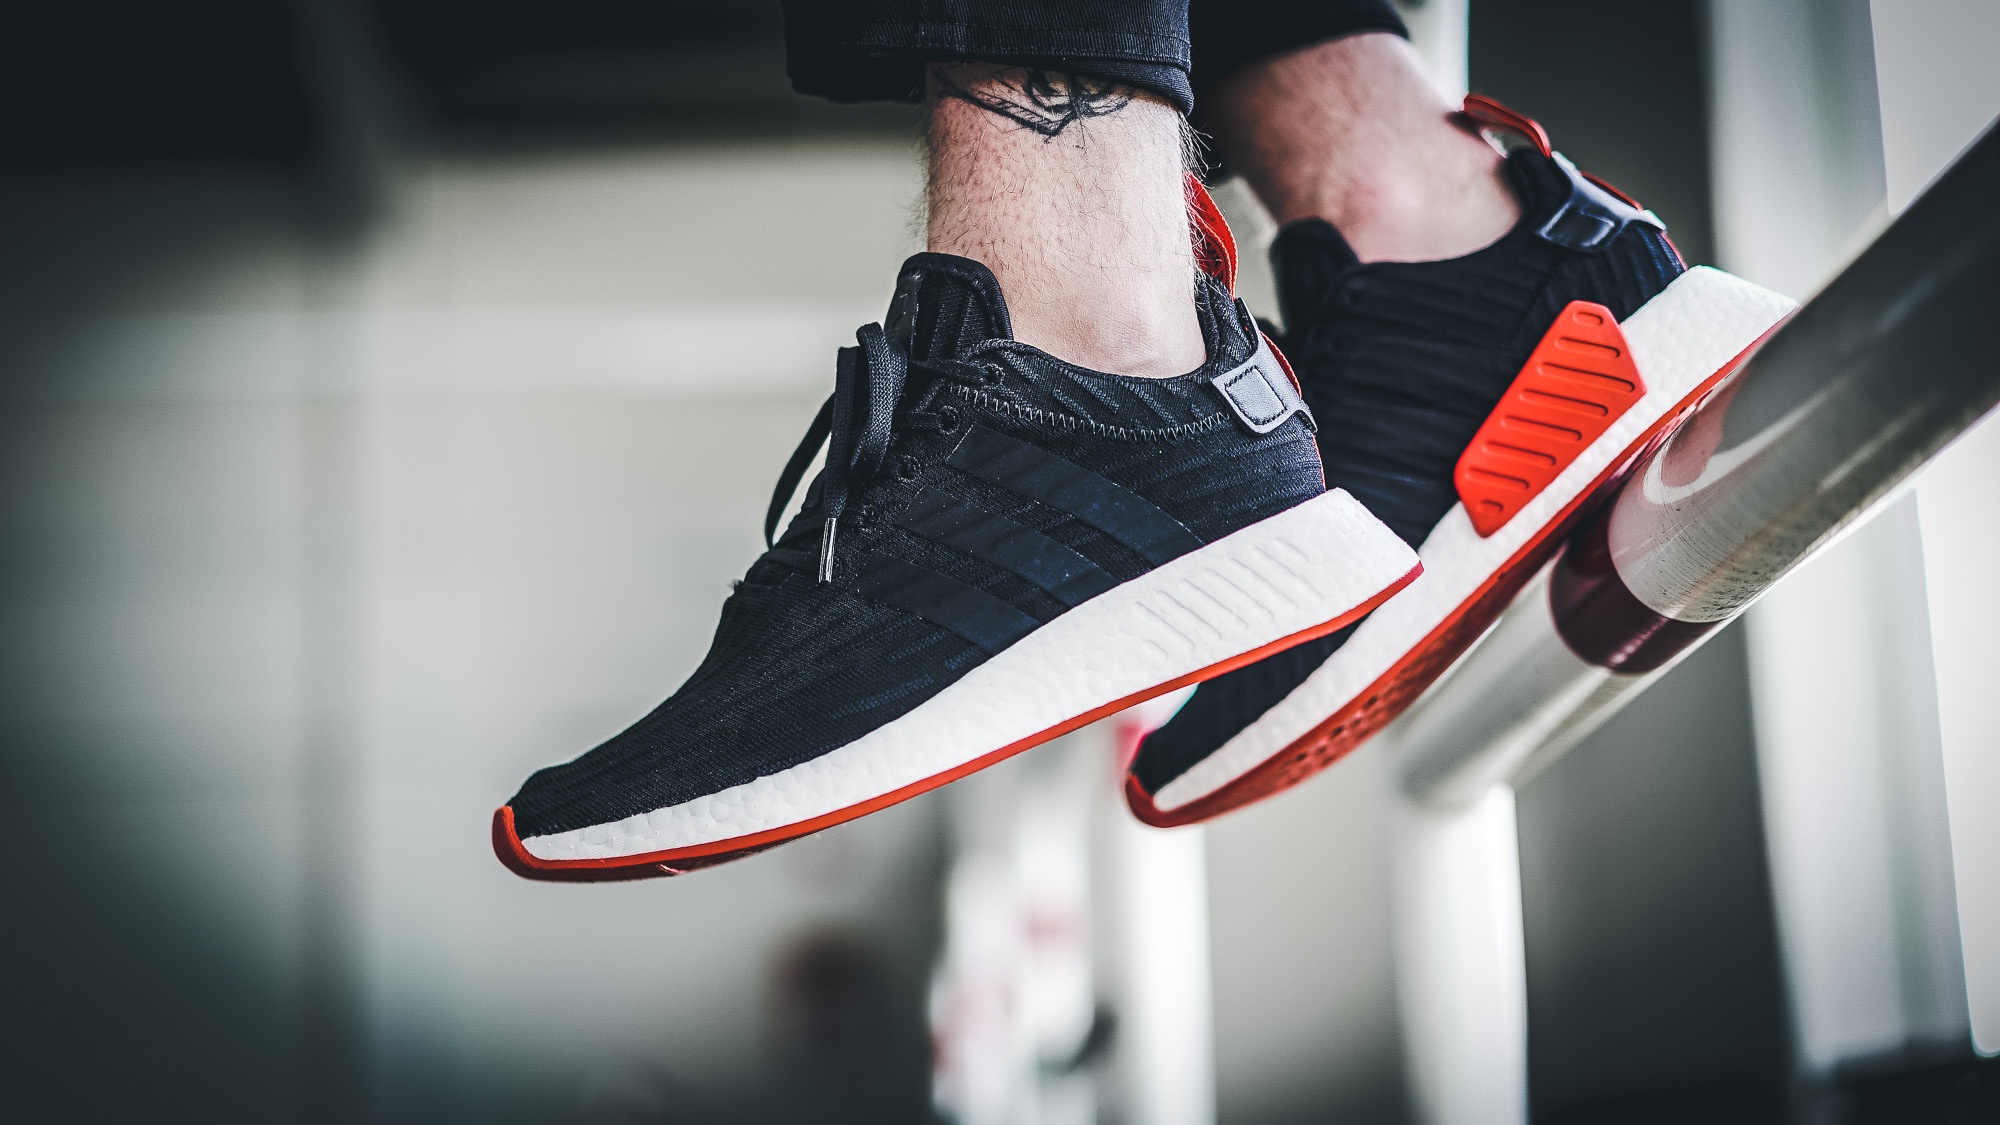 adidas NMD_R2 Primeknit "Bred Pack" is UNDER RETAIL - Cop These Kicks